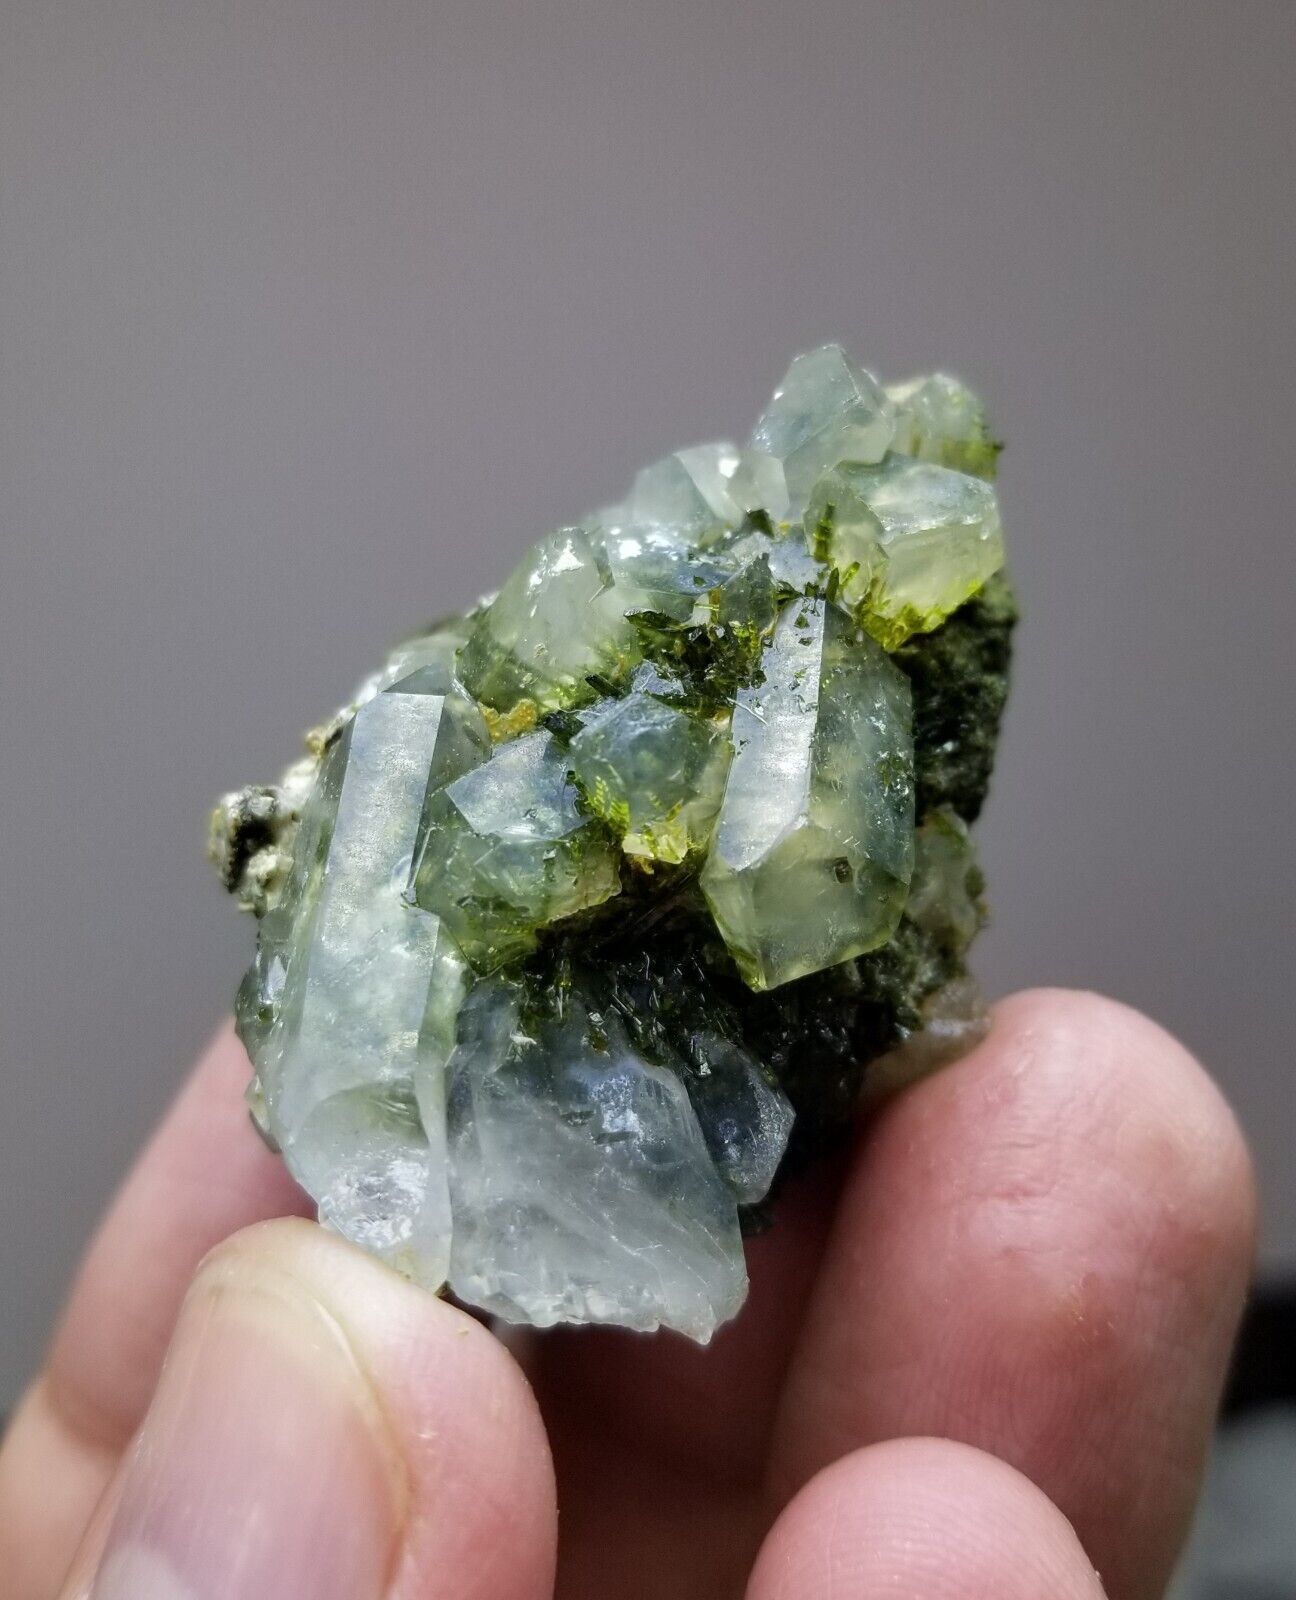 Natural Green Epidote Included Quartz Crystals On Matrix With Transparency, 38 G